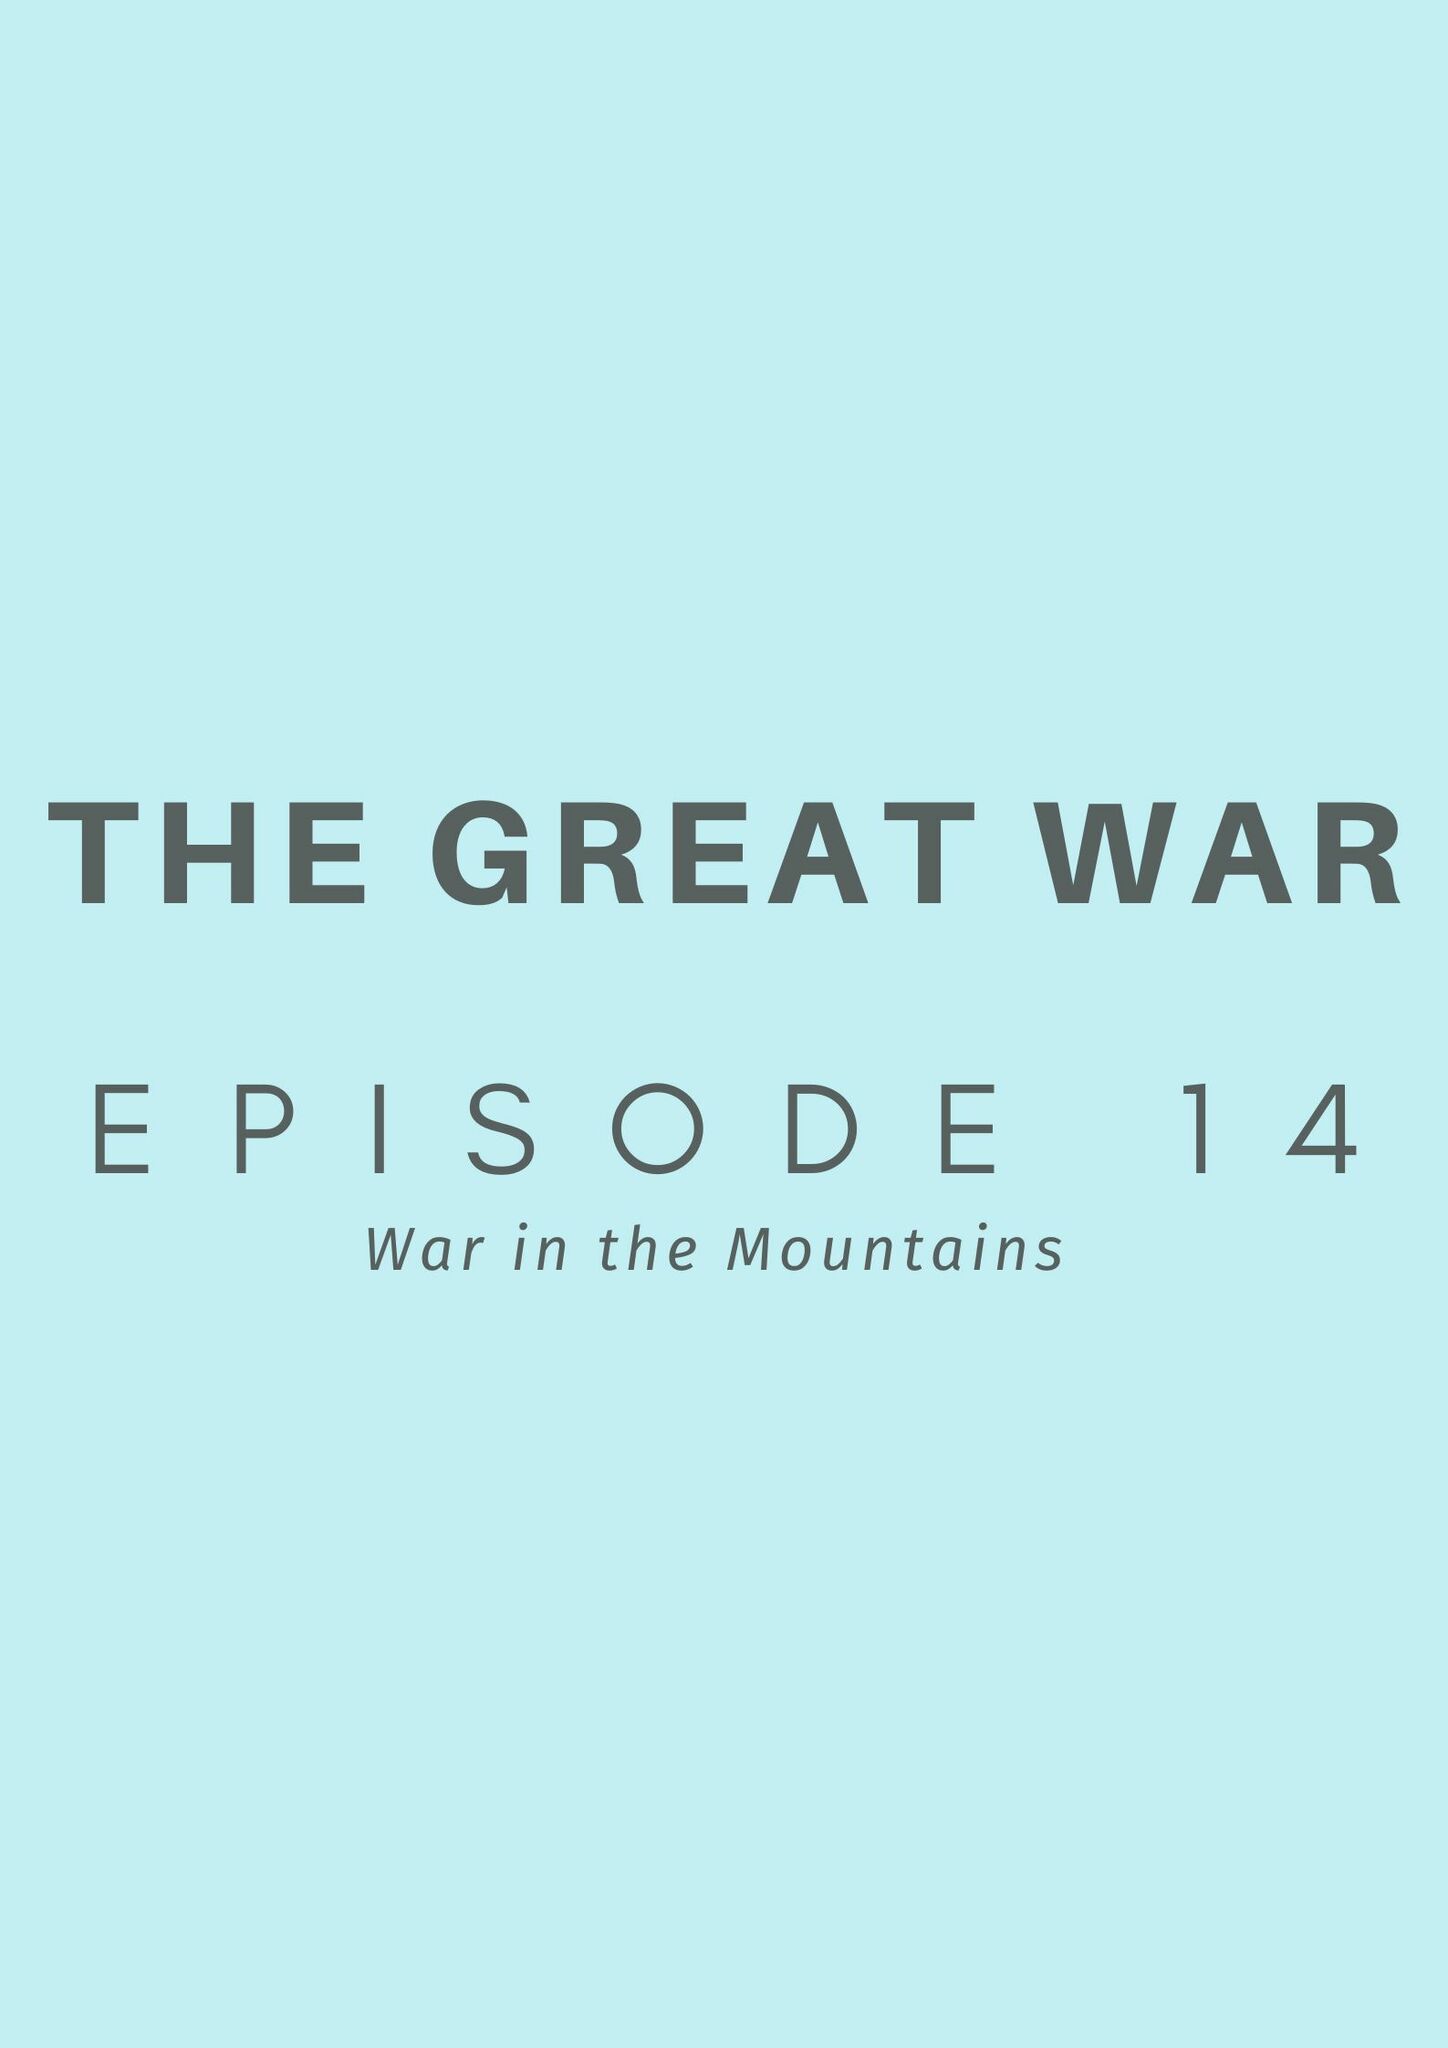 WAR IN THE MOUNTAINS